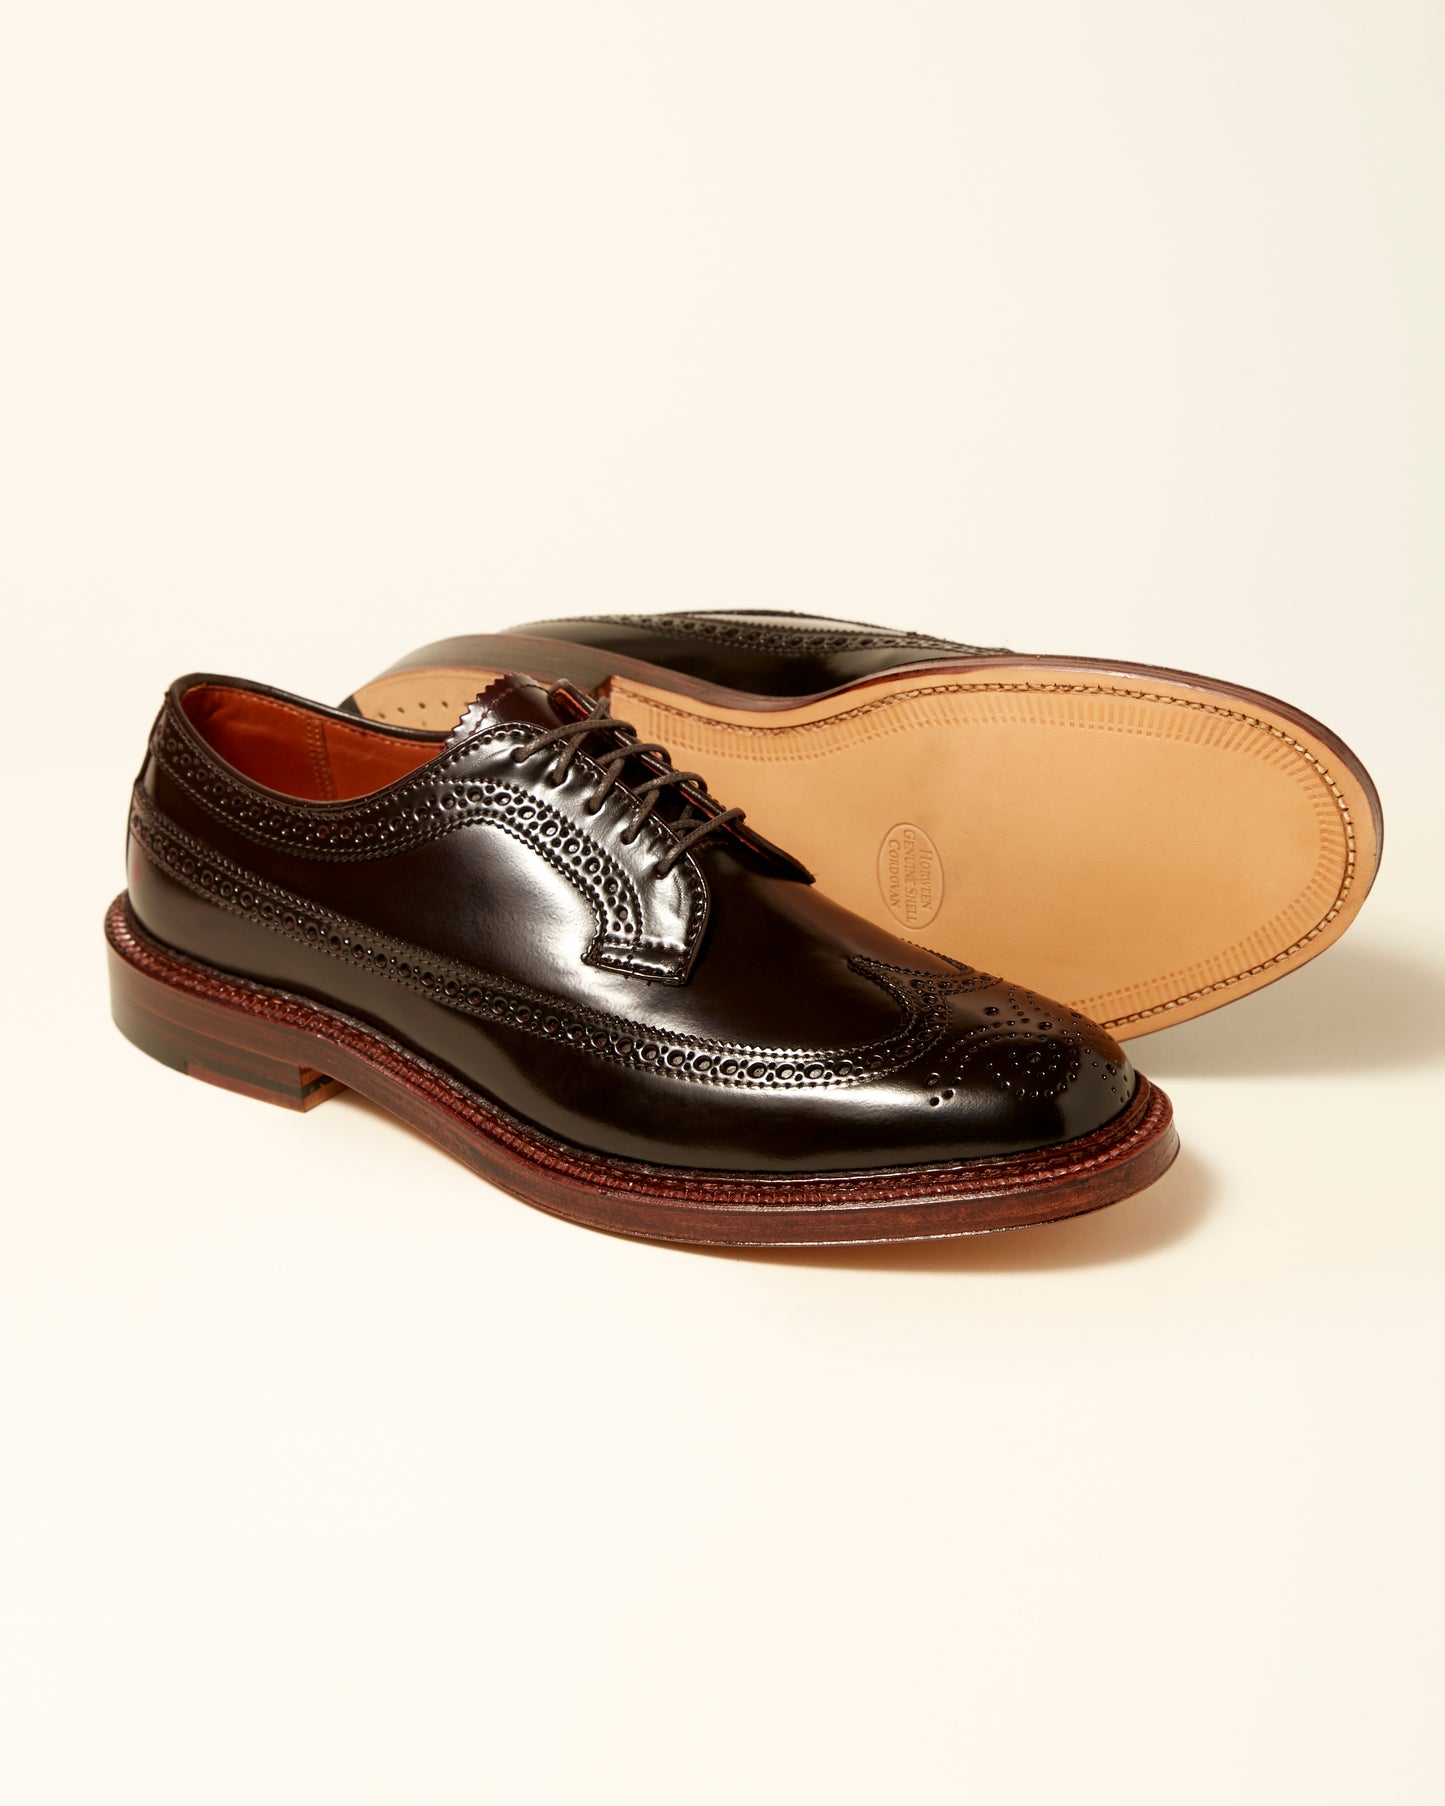 975A Long Wing Blucher in Color 8 Shell Cordovan, Barrie Last